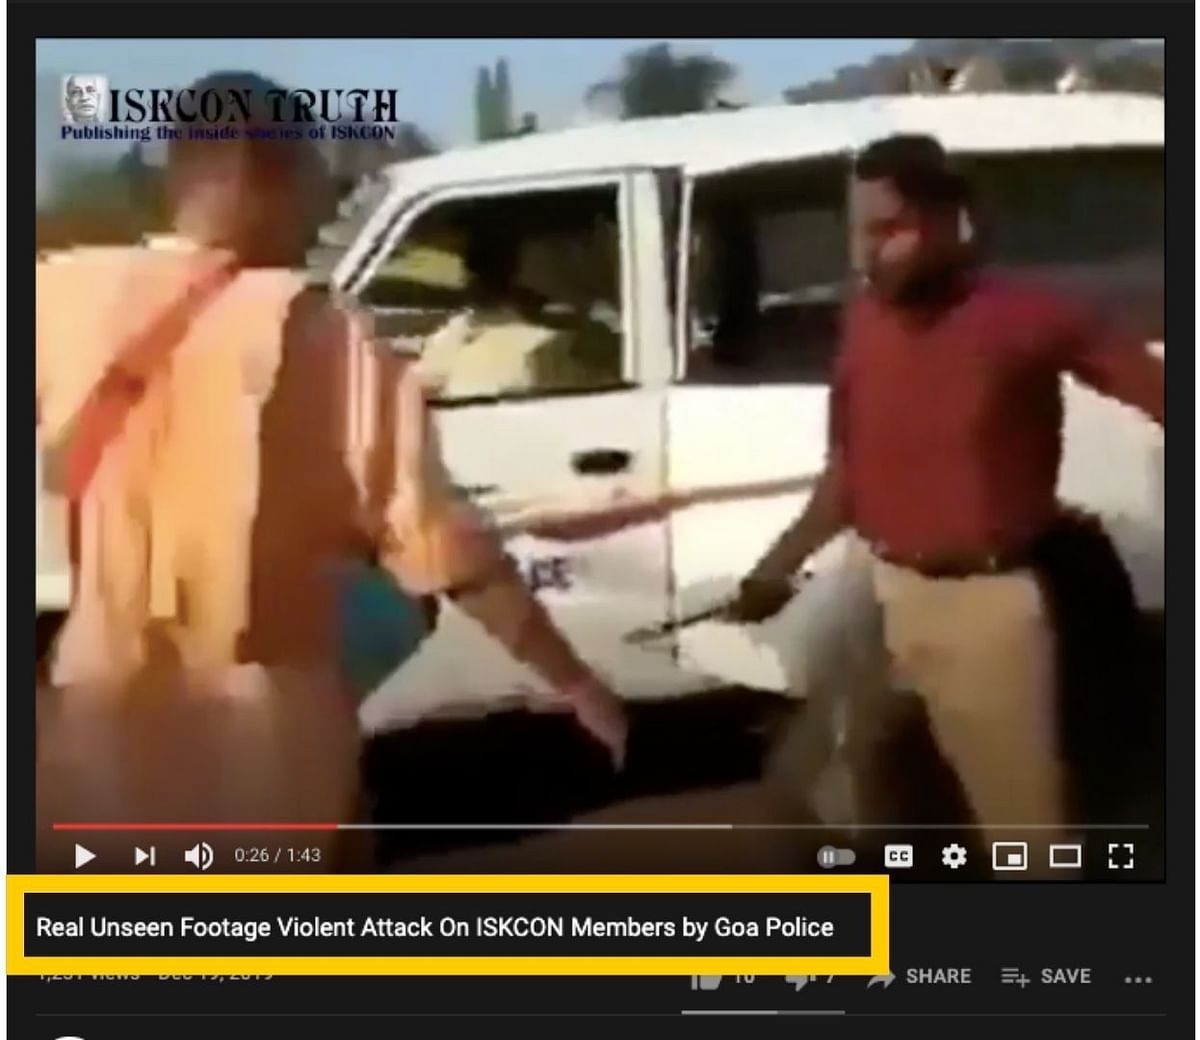 The video is from 2008 and the incident happened in Goa.